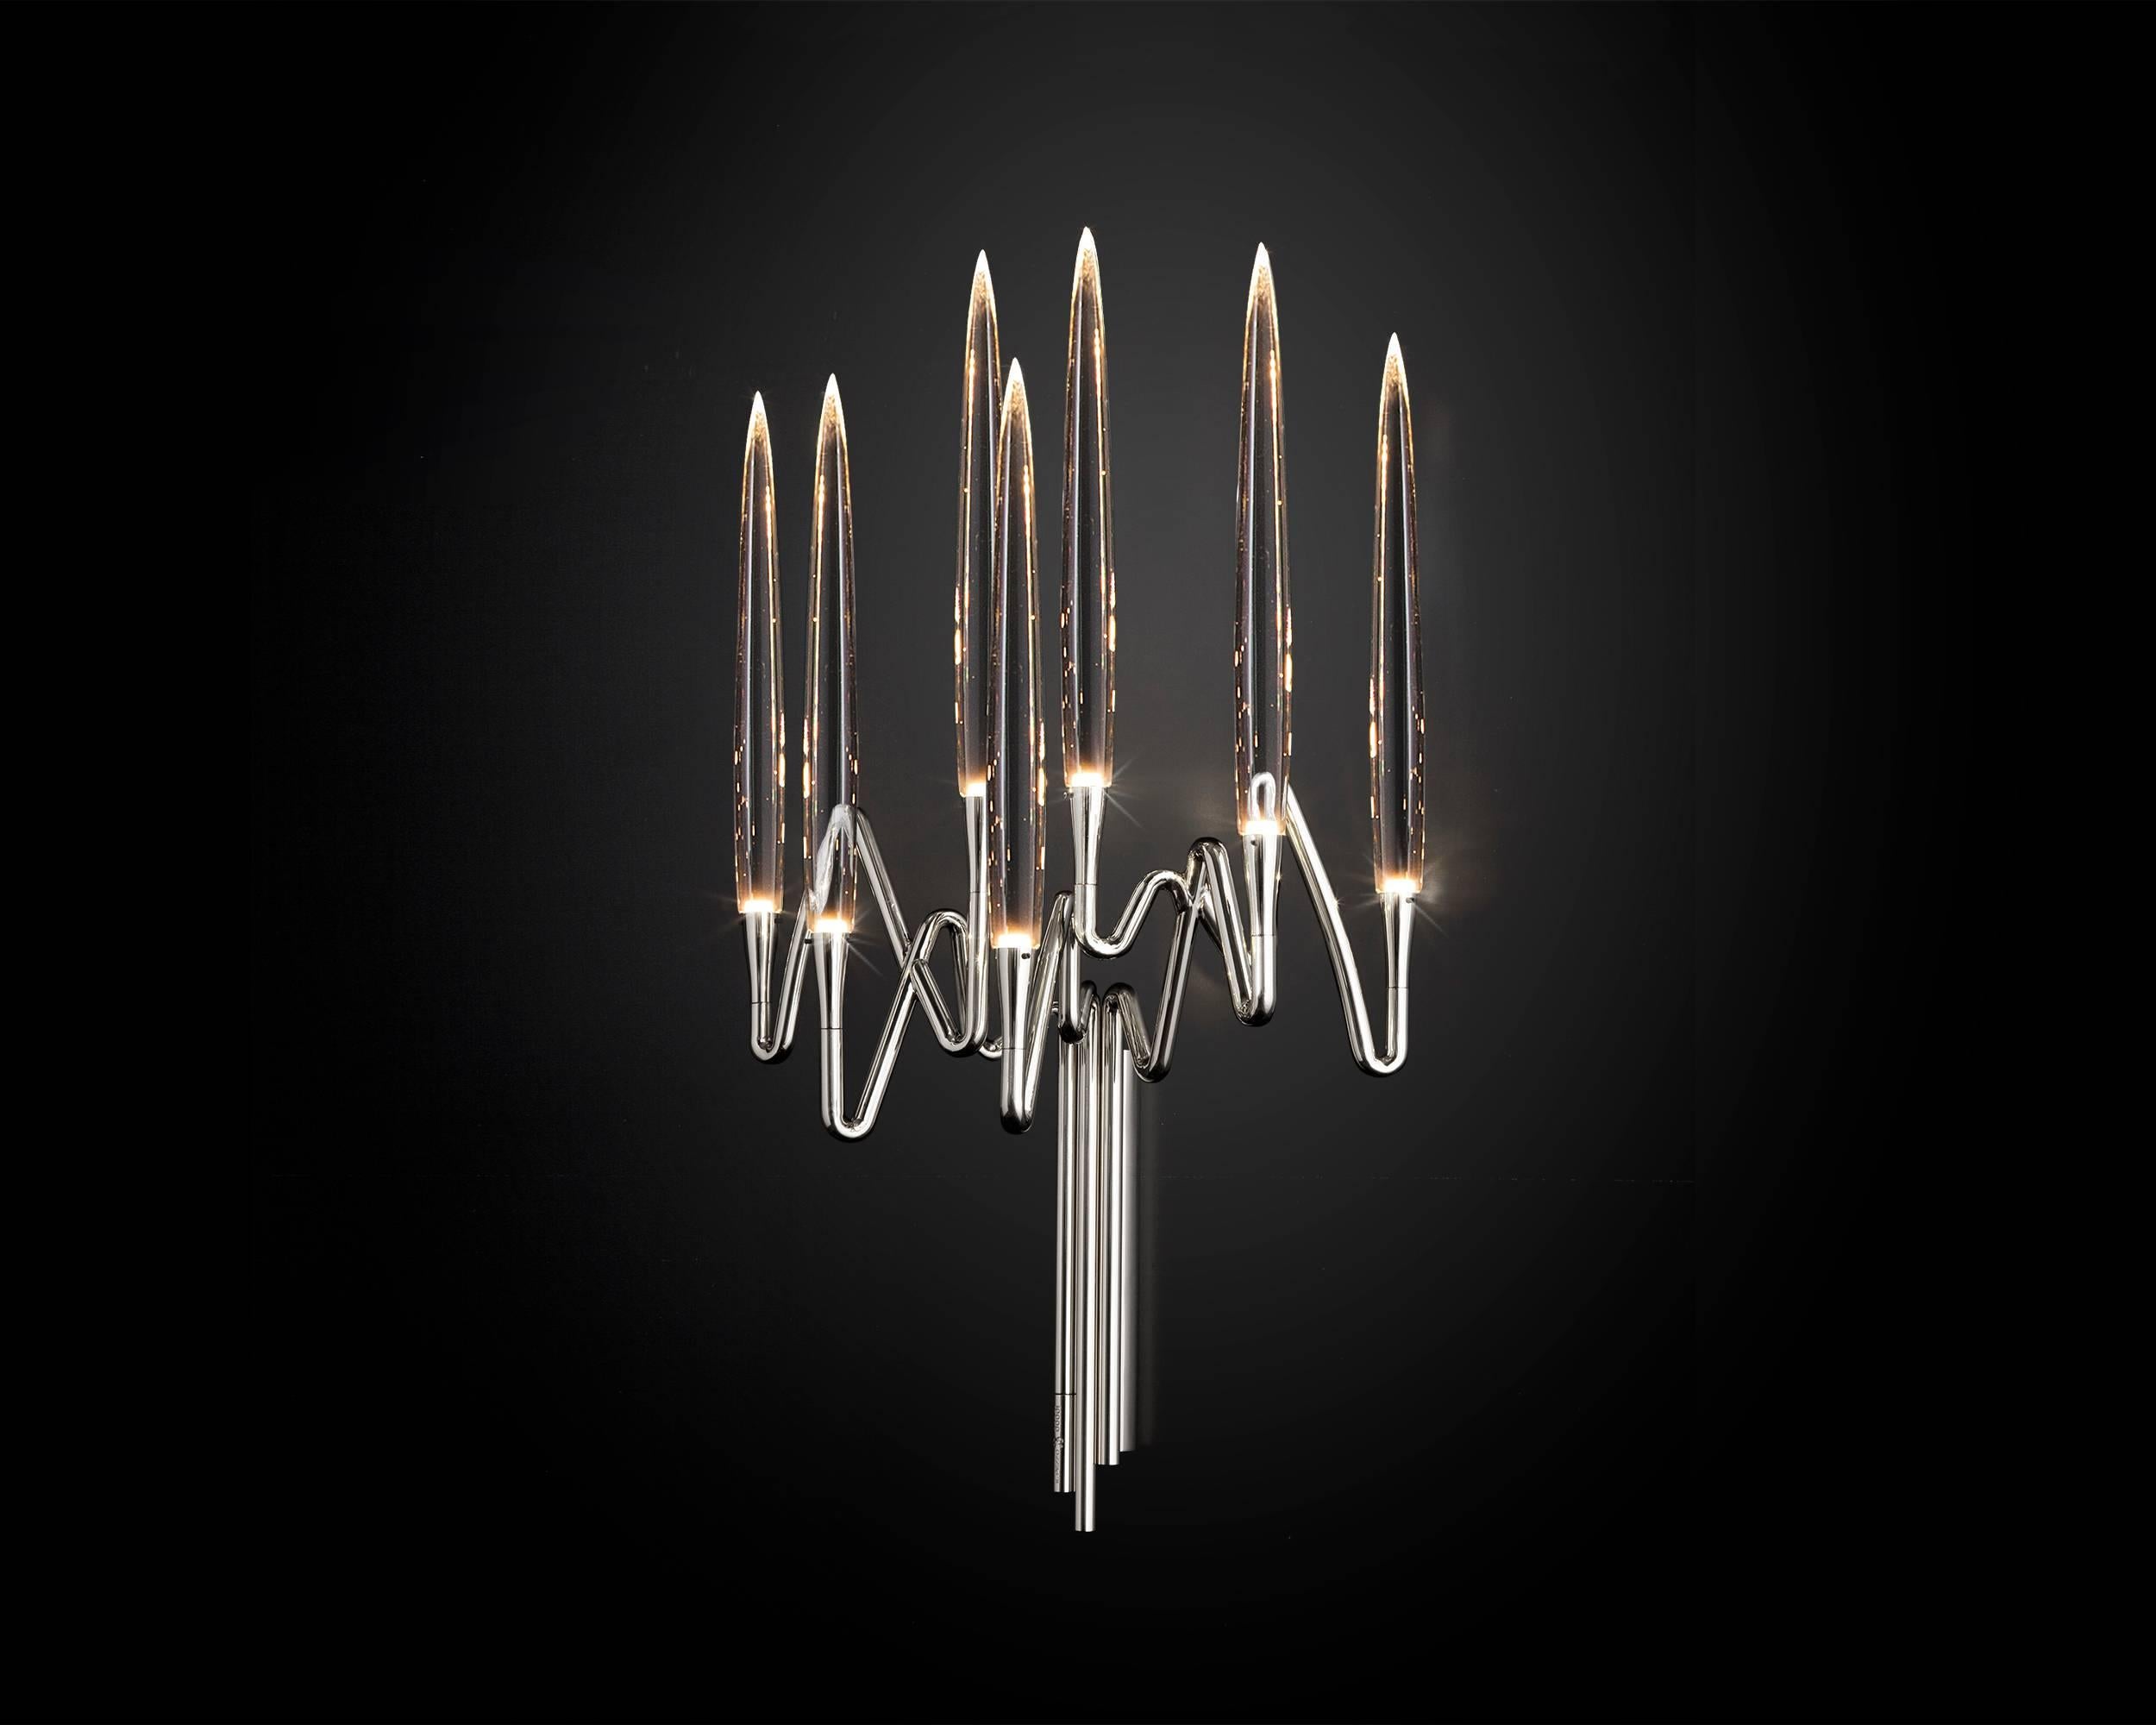 Inspired by Arabic calligraphic art and the icon of the classical candelabrum is Il Pezzo 3, a collection of lamps with a hand-forged brass structure and elegant “candles” crafted from hand blown crystal, according to the noble Tuscan artisan